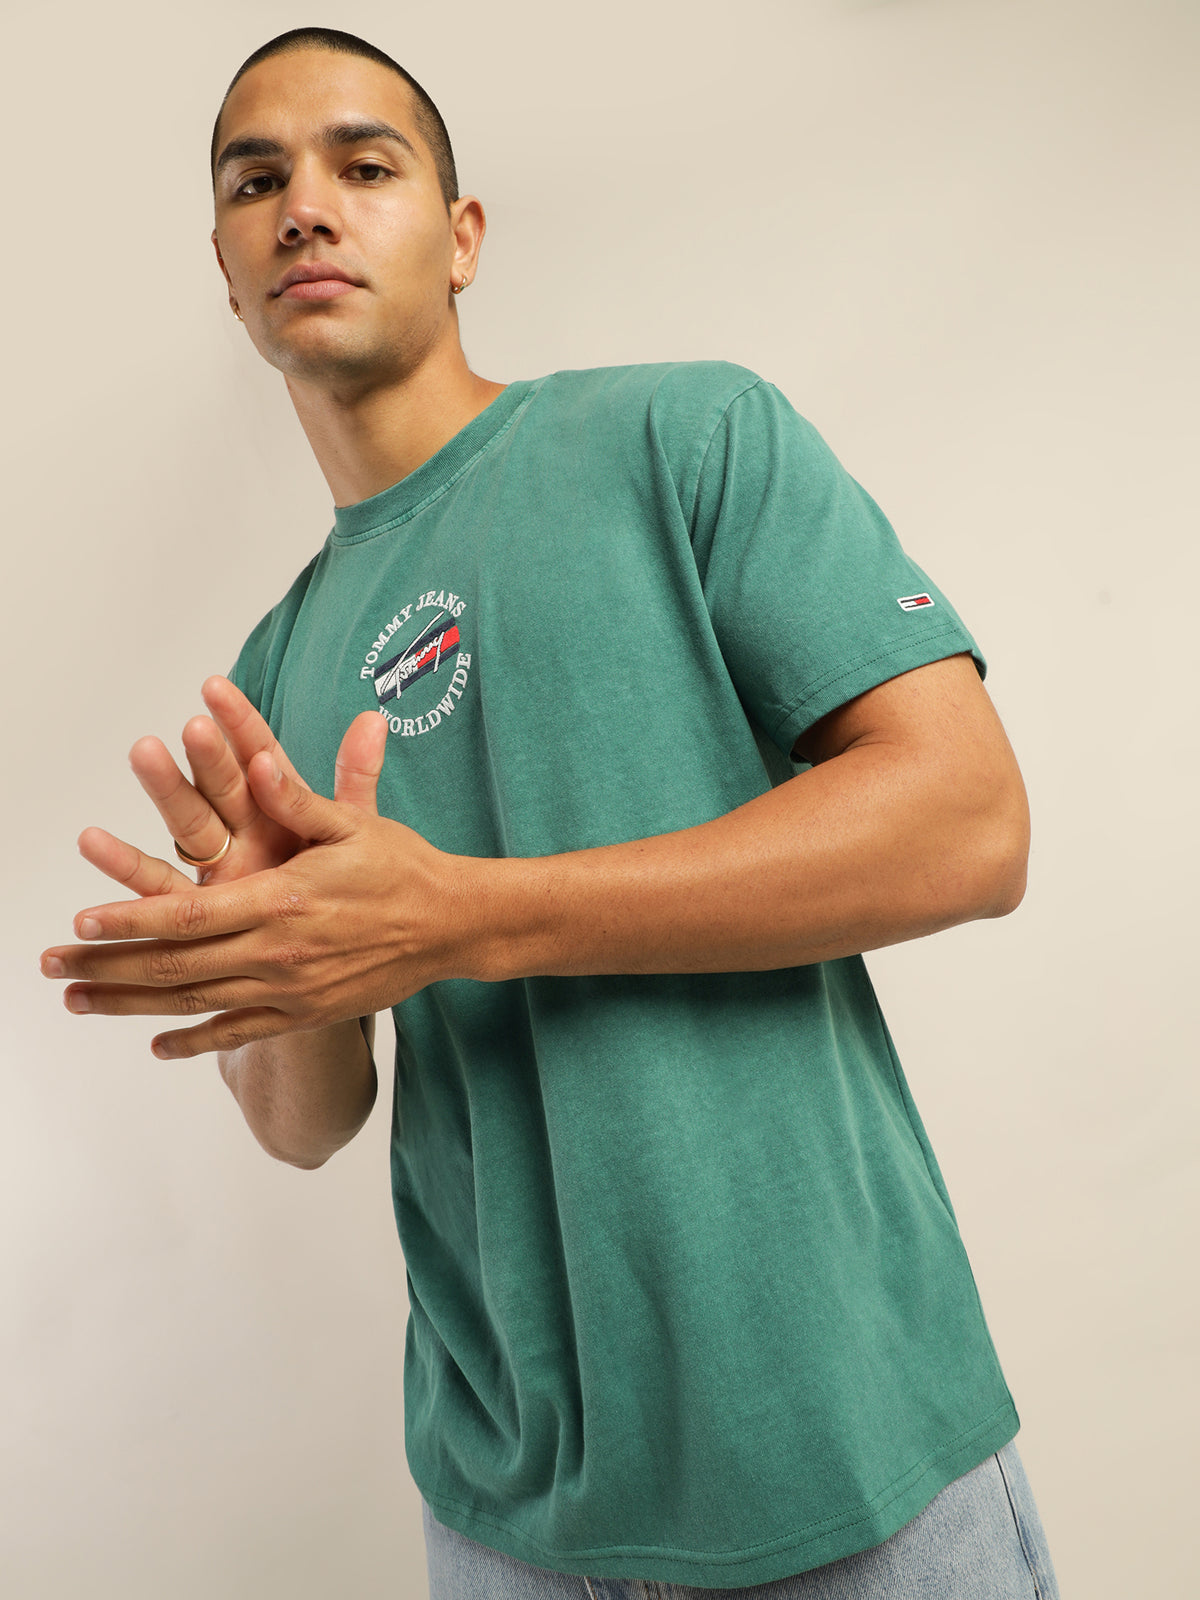 Timeless Tommy 2 T-Shirt in Rural Green